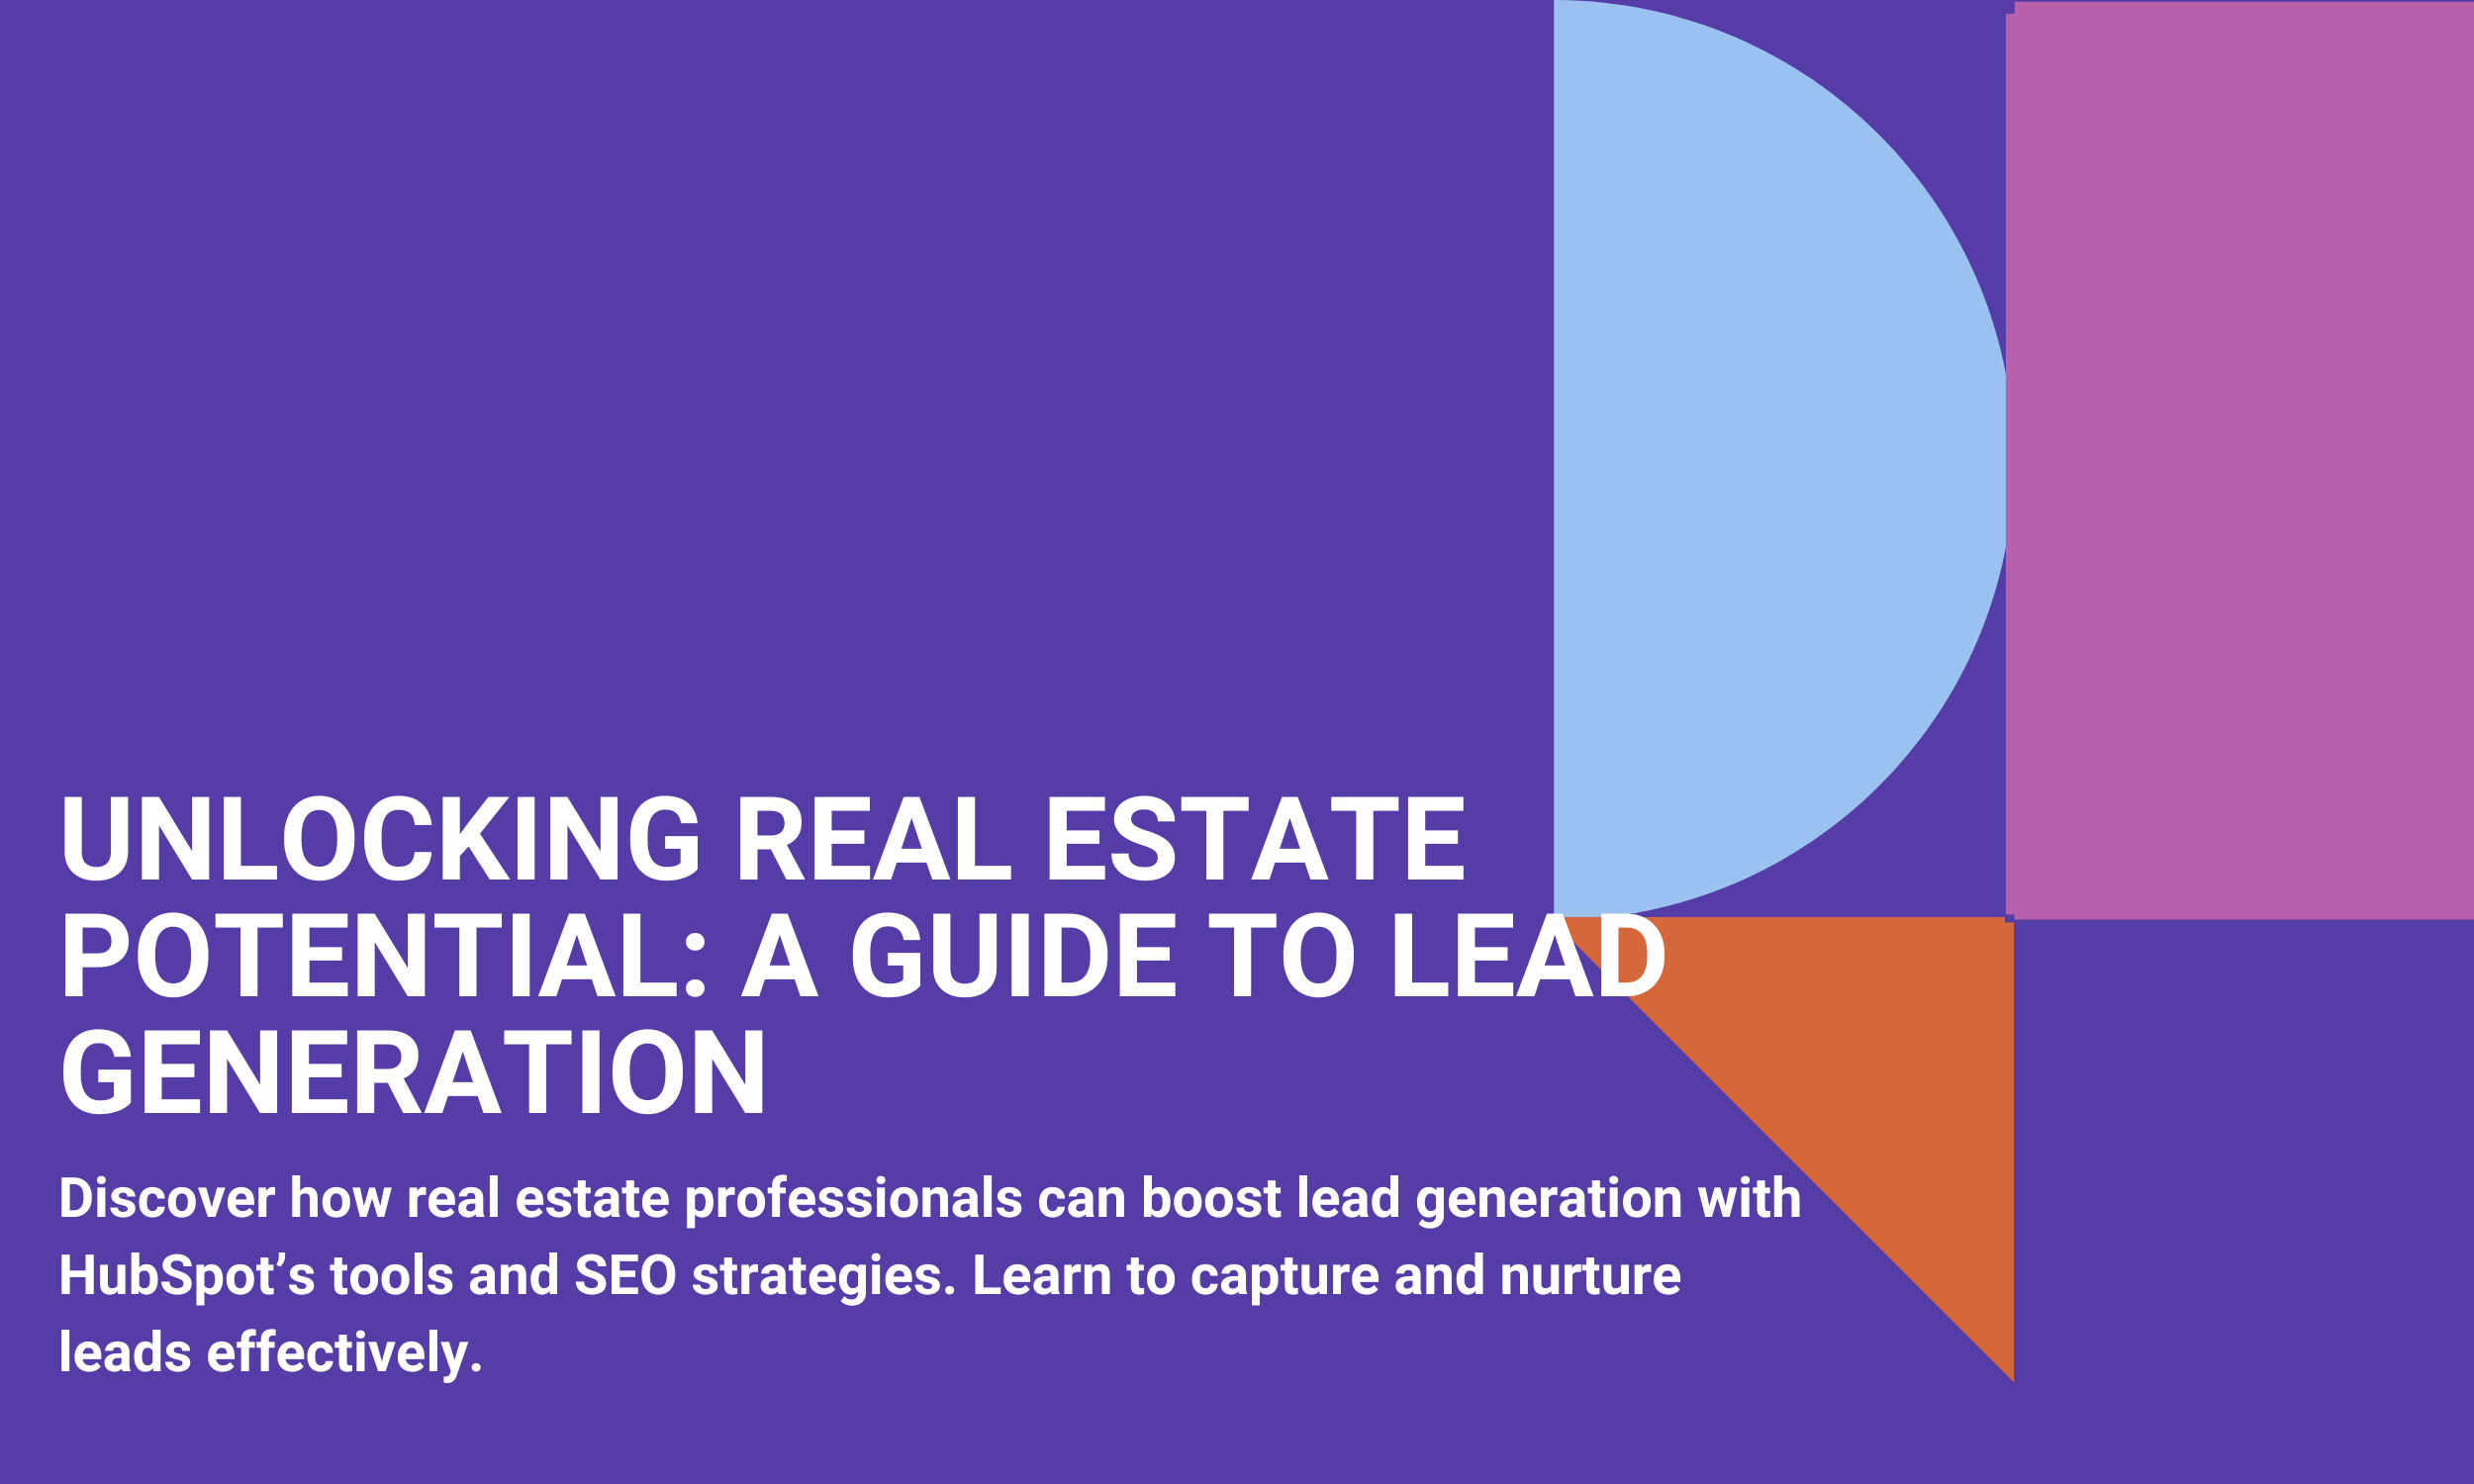 Unlocking Real Estate Potential: A Guide to Lead Generation